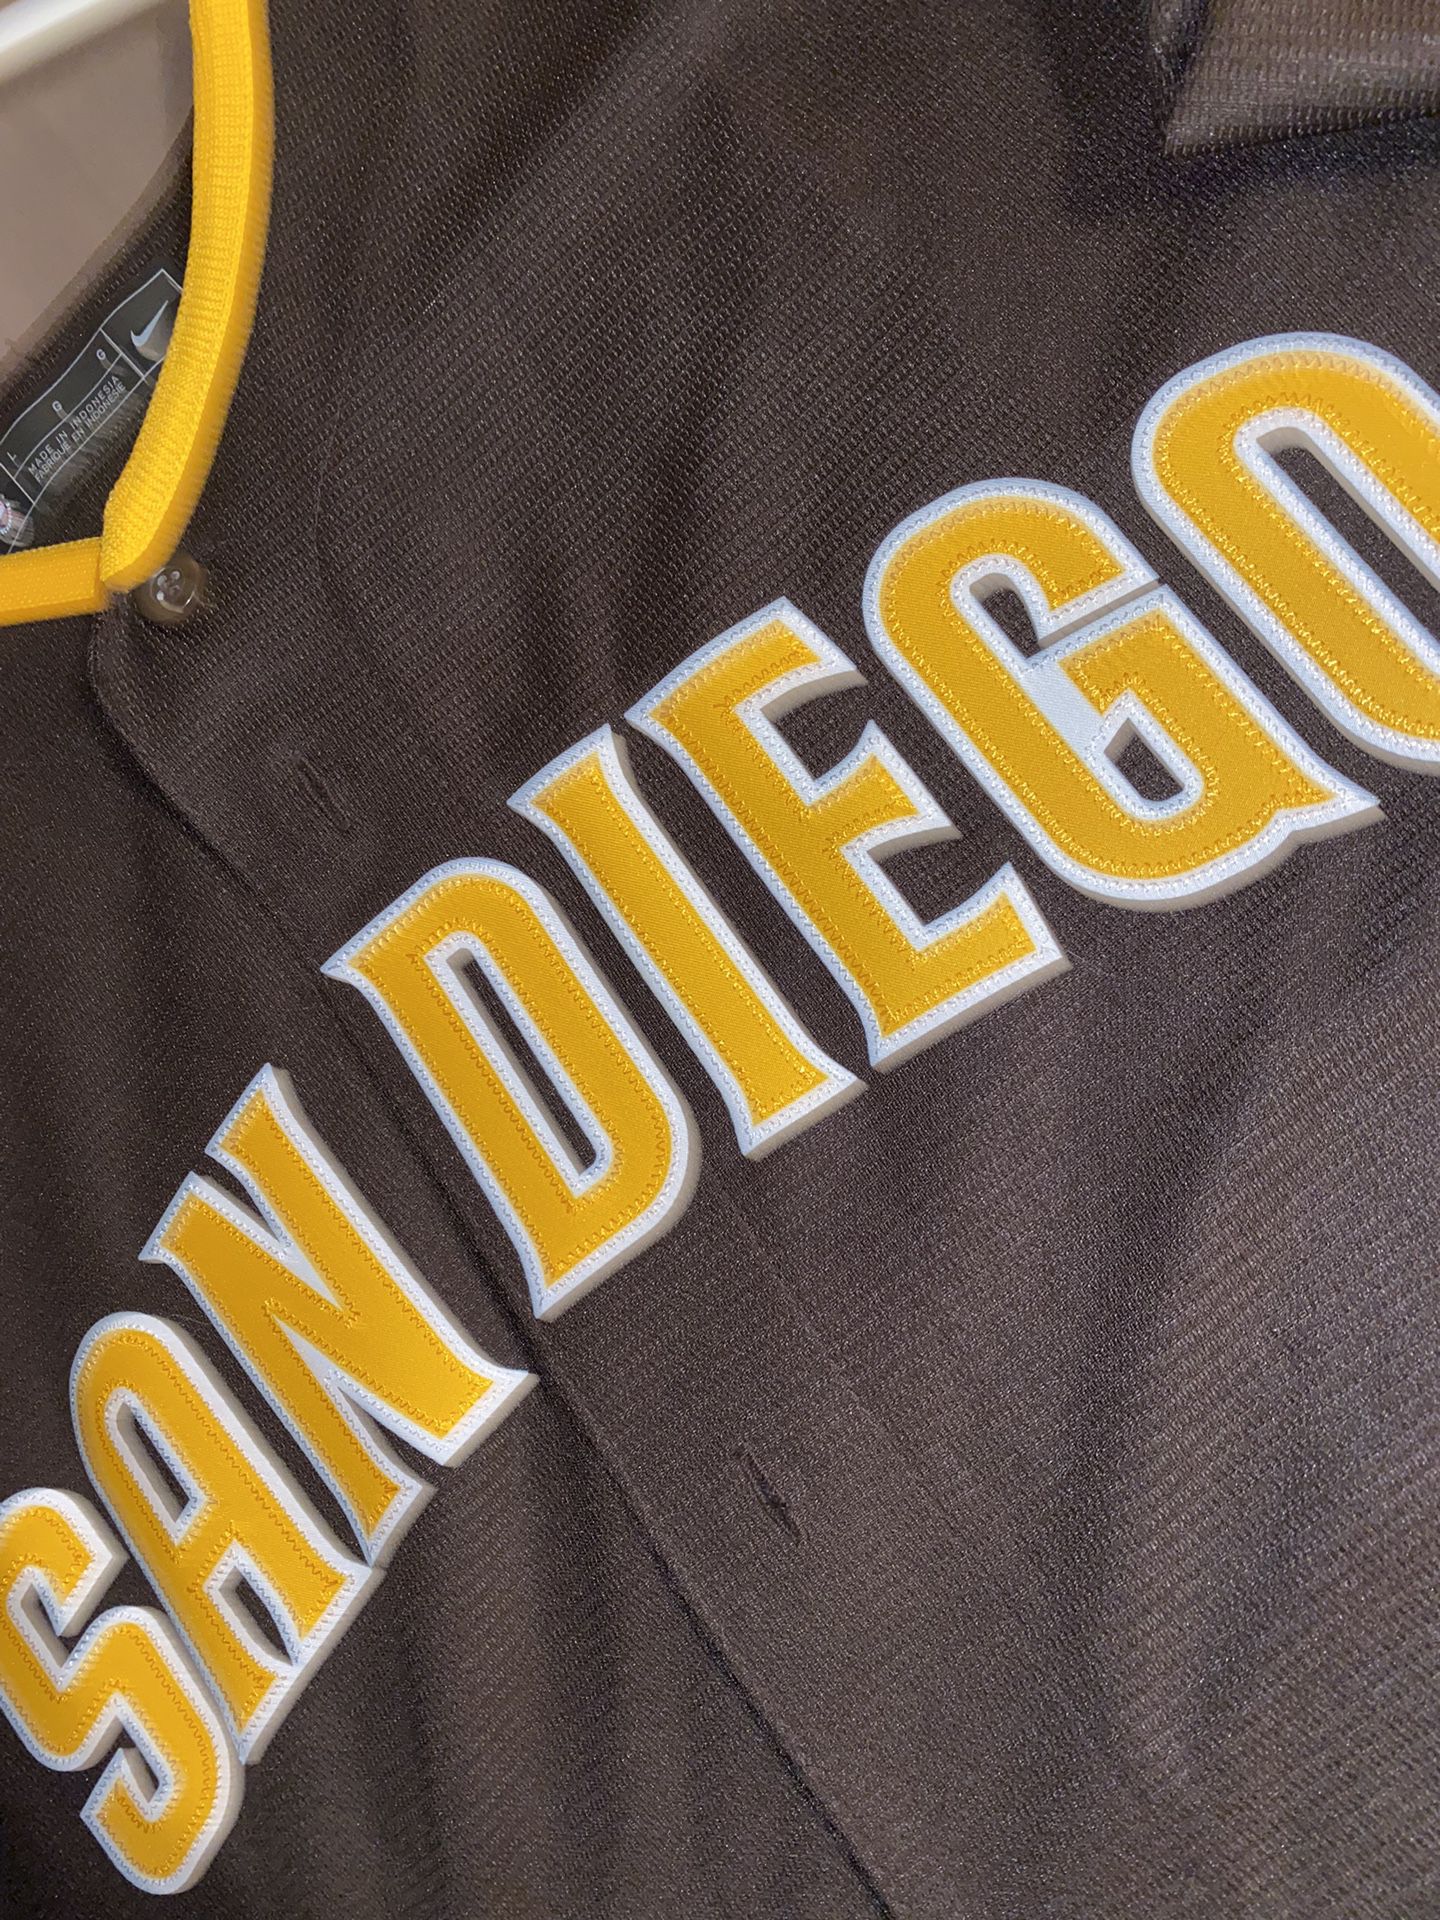 Joe Musgrove San Diego Padres City Connect Women's Jersey for Sale in  Bonita, CA - OfferUp